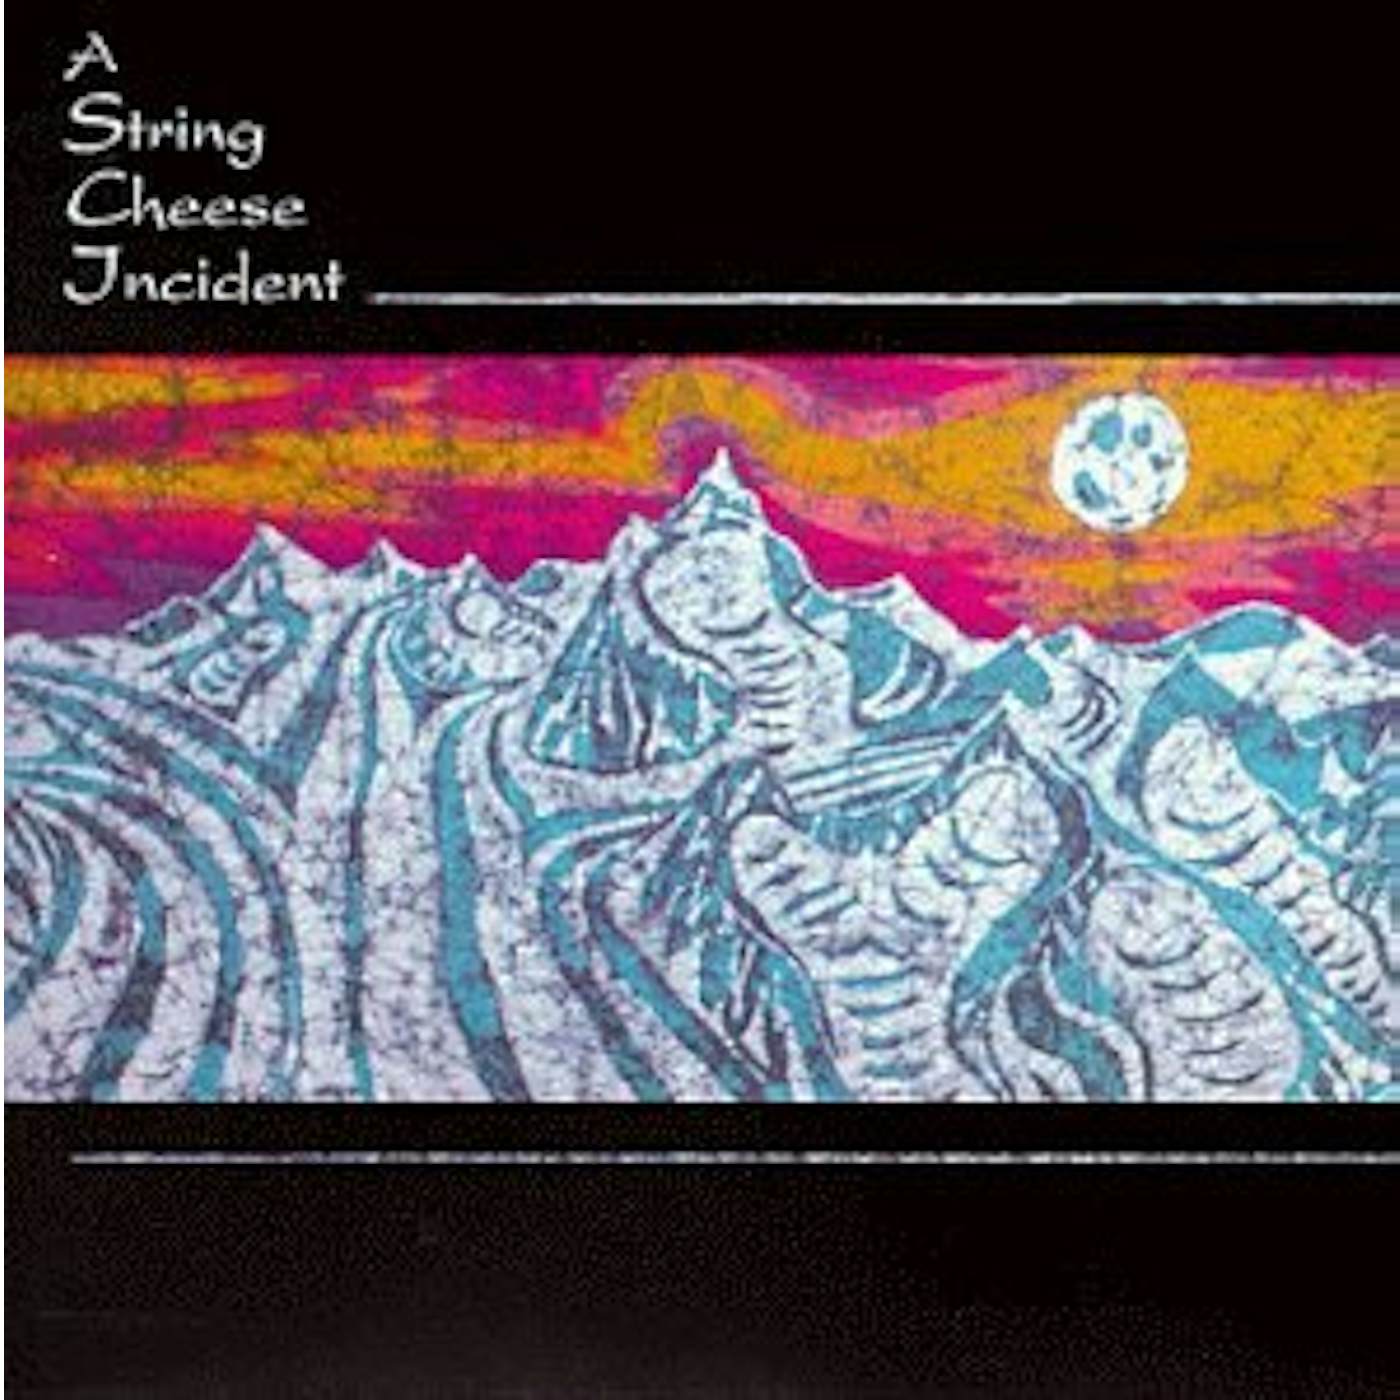 The String Cheese Incident LIVE CD